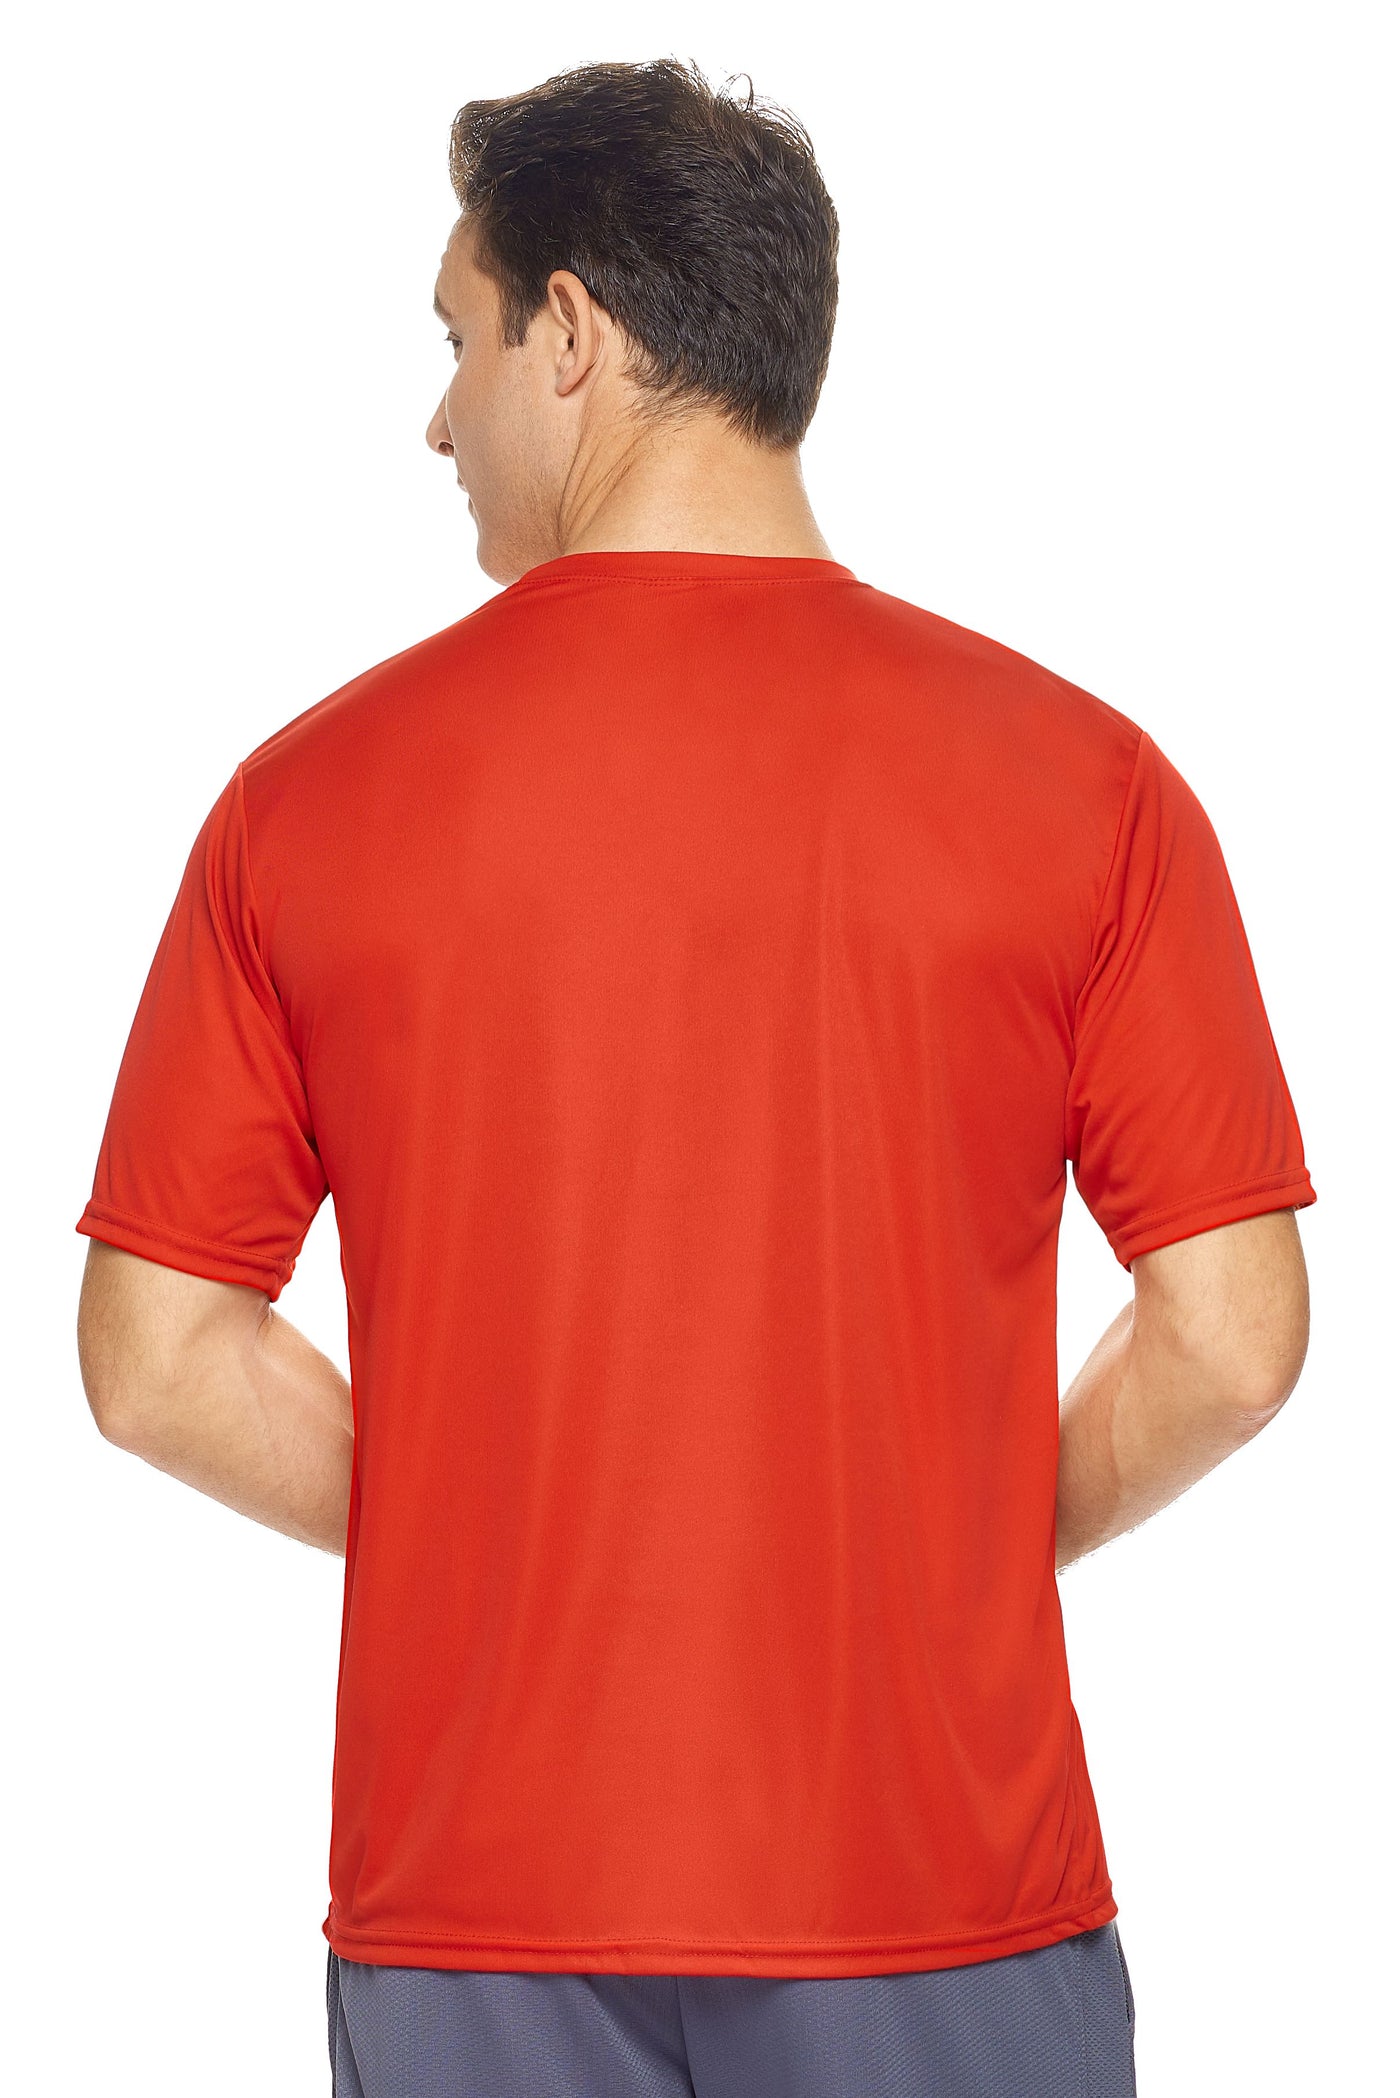 Expert Brand Retail Made in USA Men's Sportswear Activewear Running Long Sleeve Shirt Pk Max true red 3#color_true-red